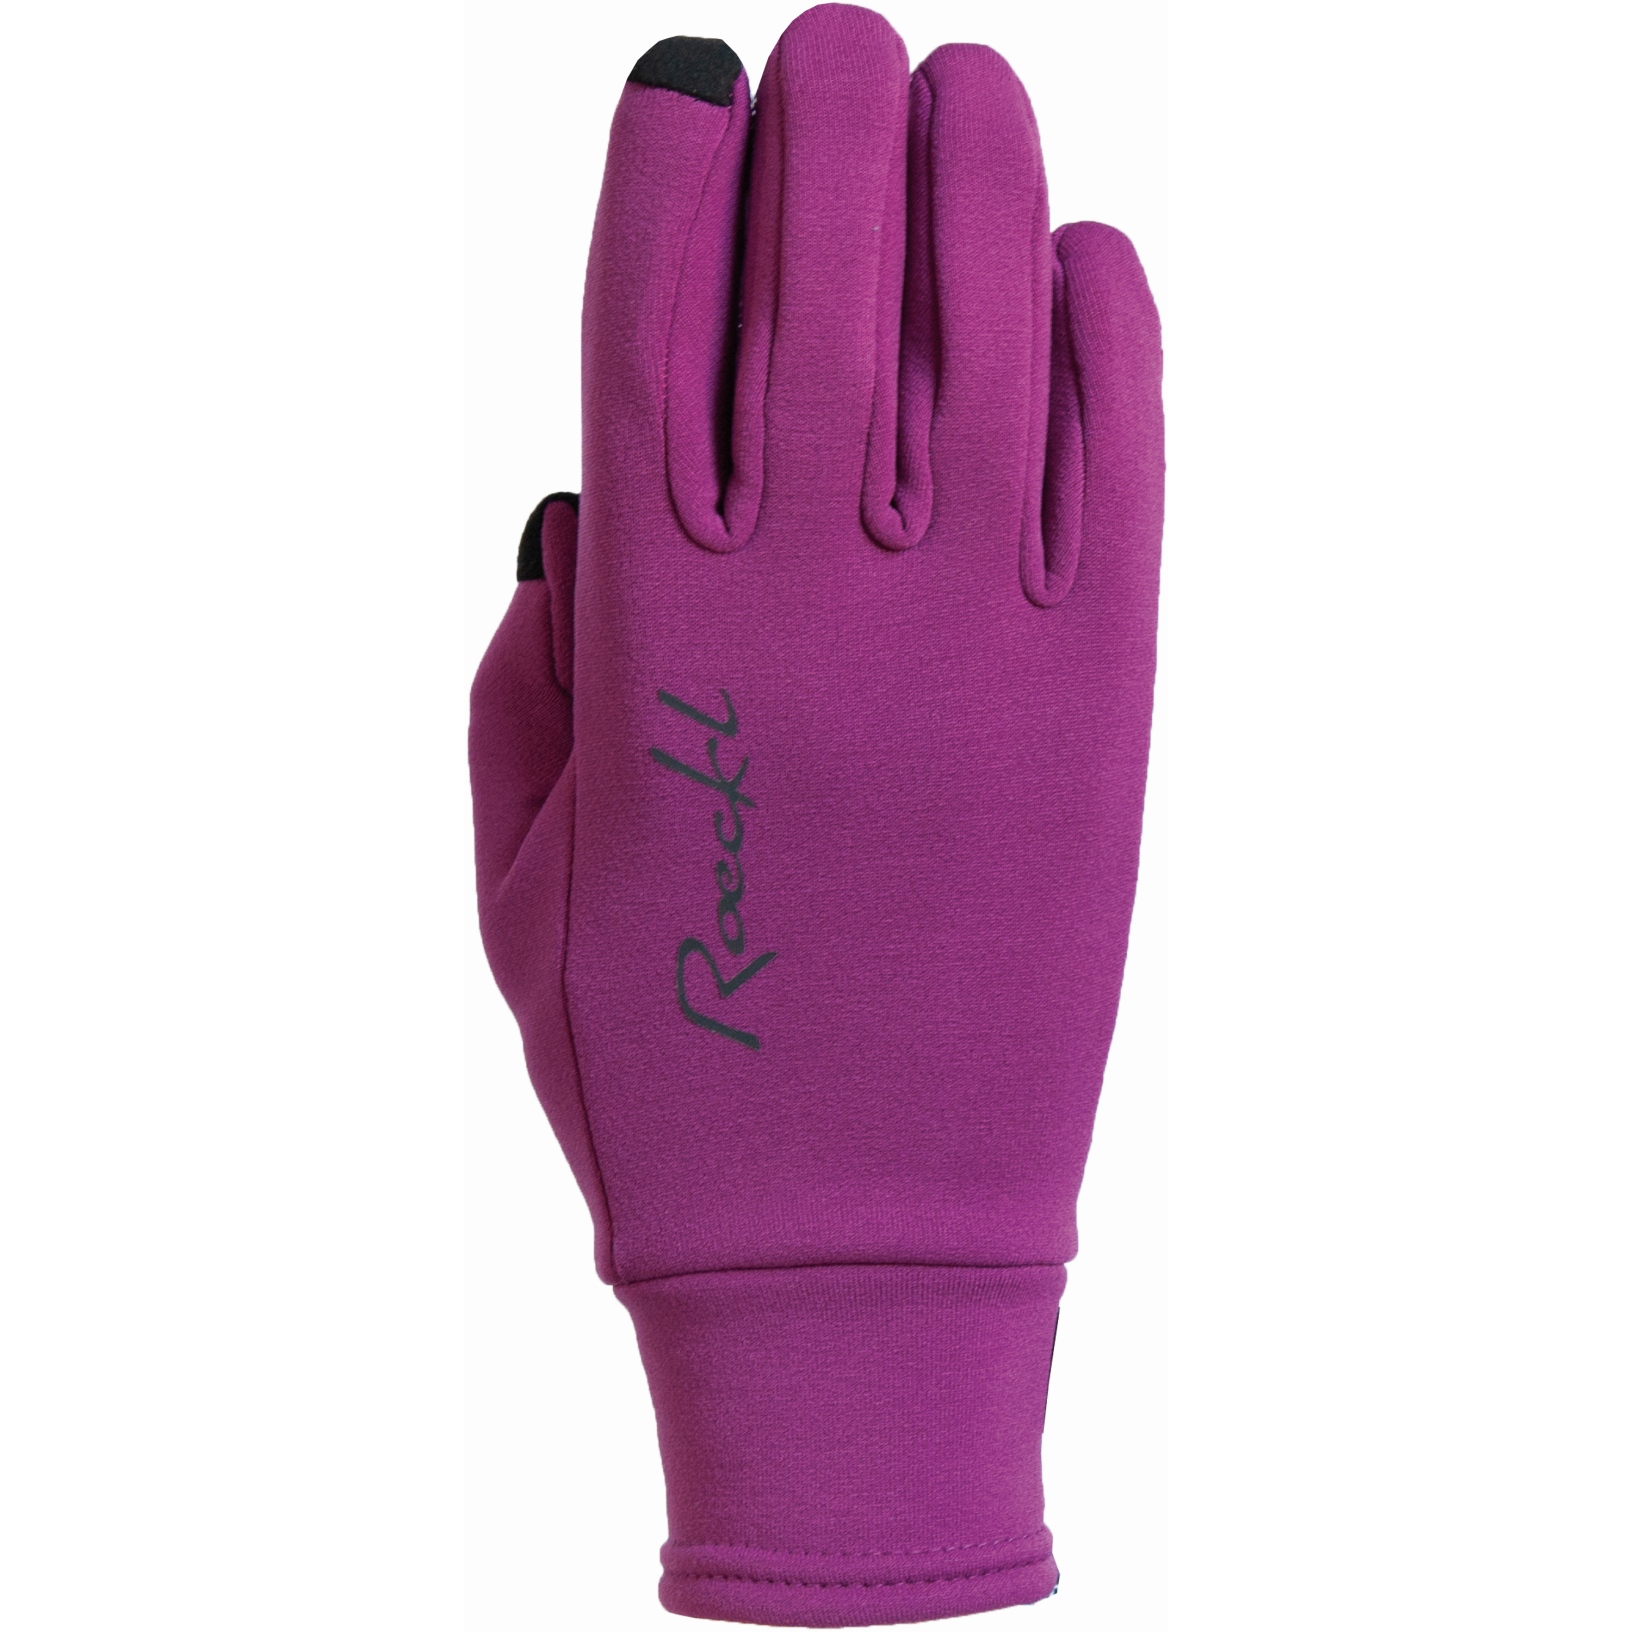 Picture of Roeckl Sports Kailash Winter Gloves - berry 0640